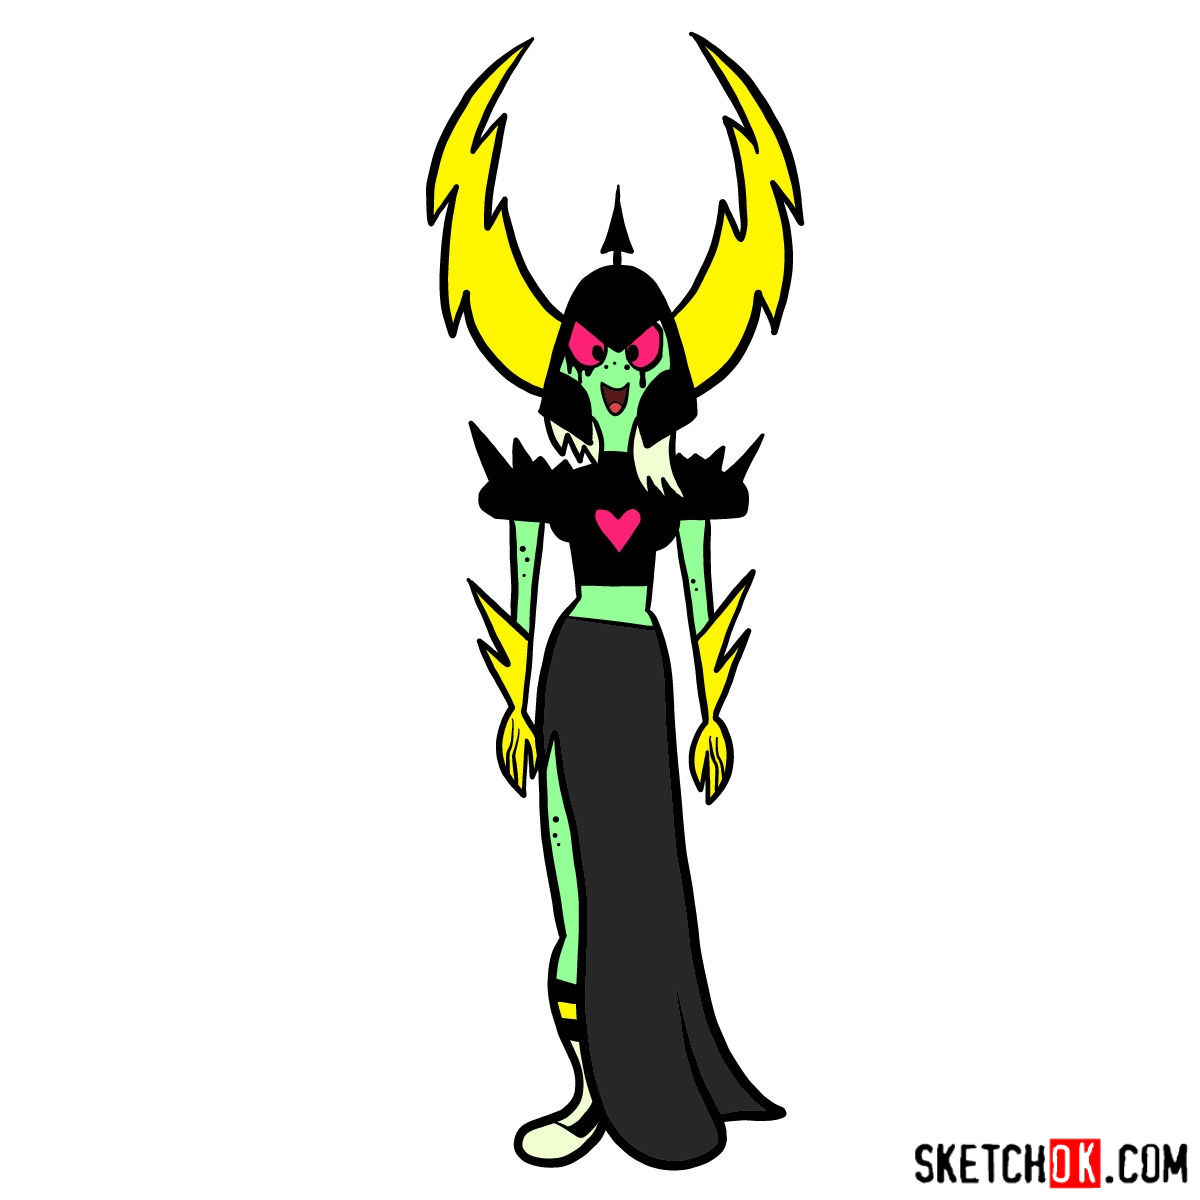 How to draw Lord Dominator